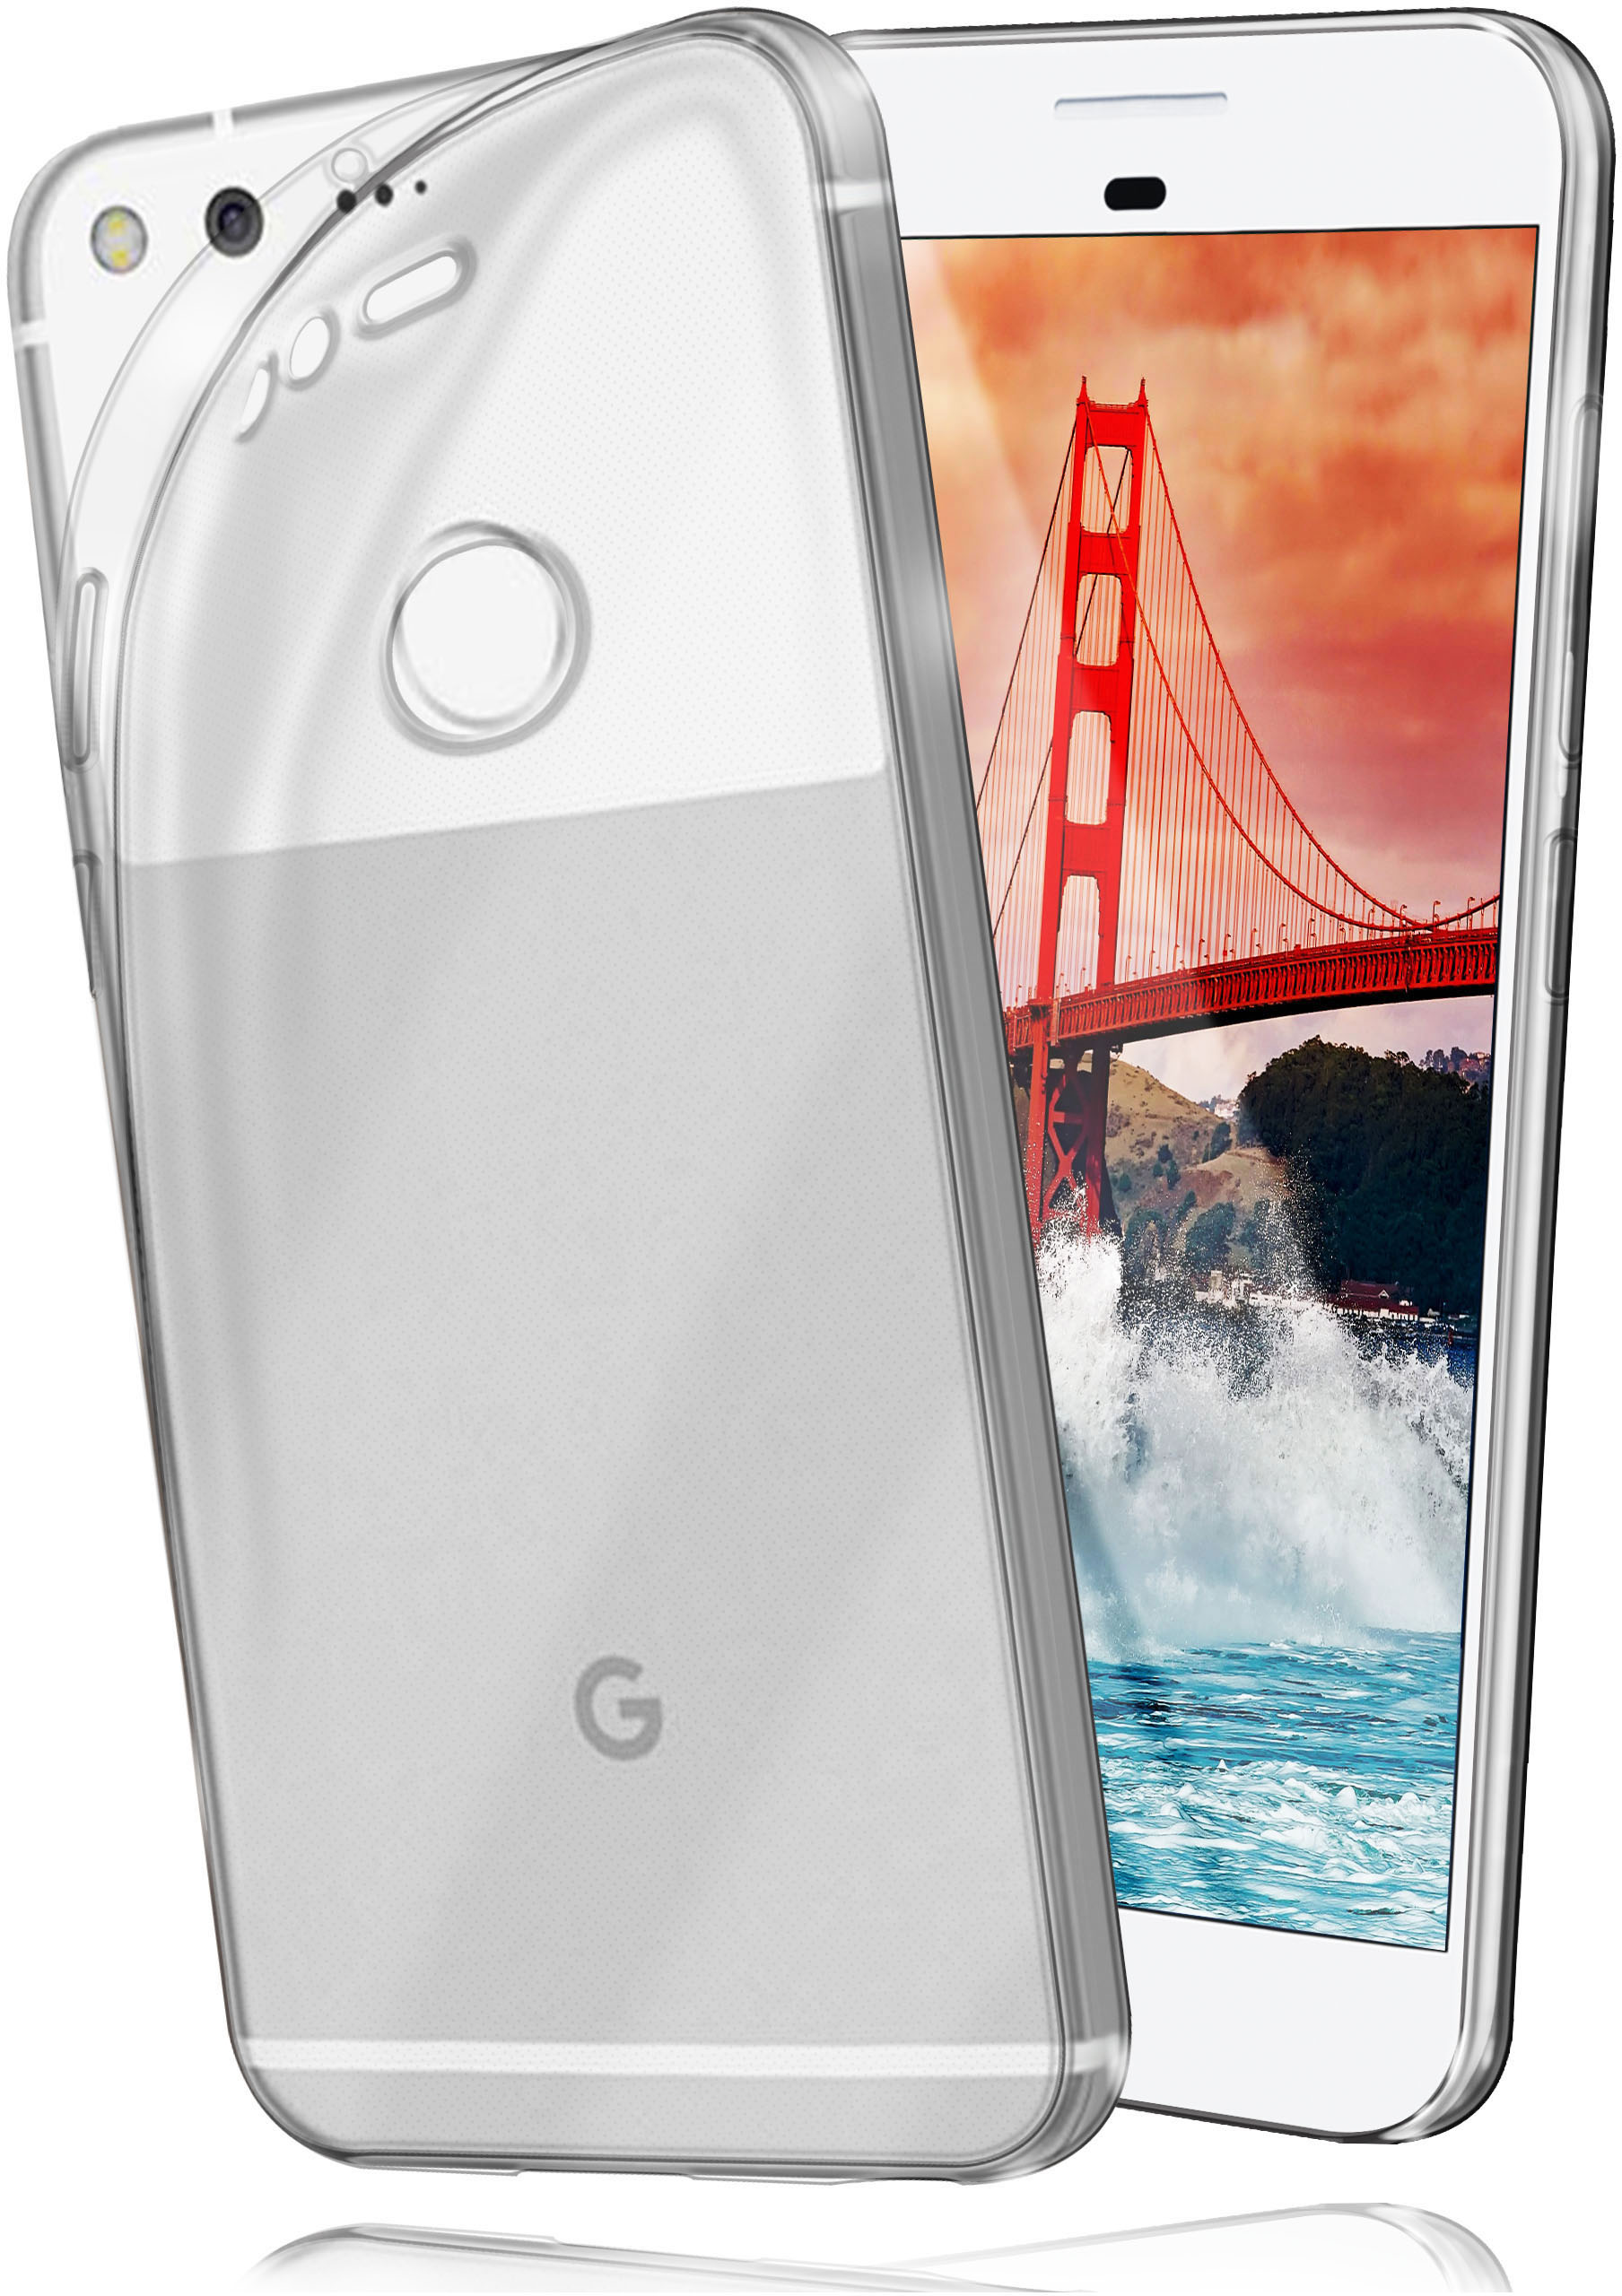 Crystal-Clear Case, Backcover, MOEX Pixel, Aero Google,